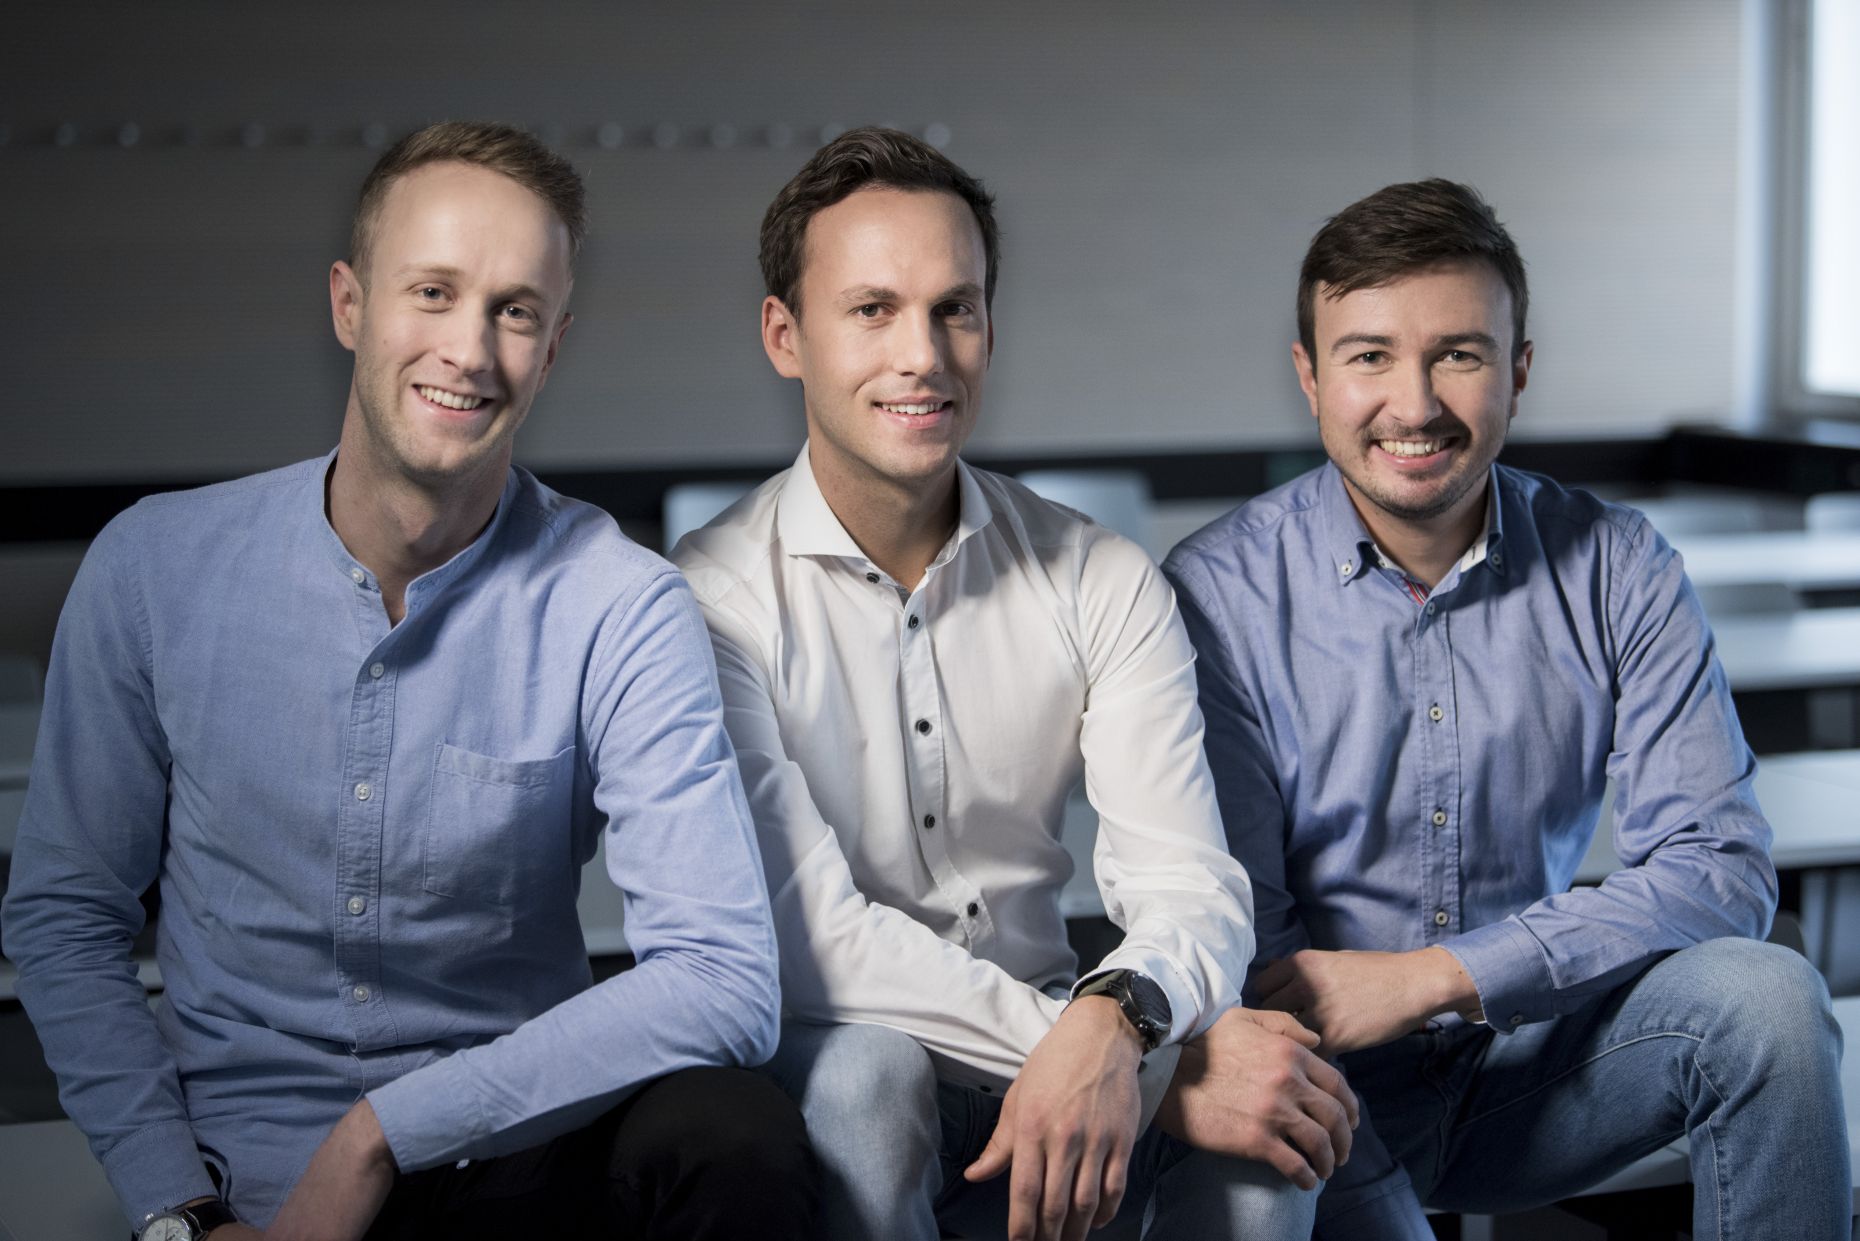 In 2018, Aeroficial was founded by aviation experts as part of a selected start-up by the incubation centre ESA BIC Austria in Graz.